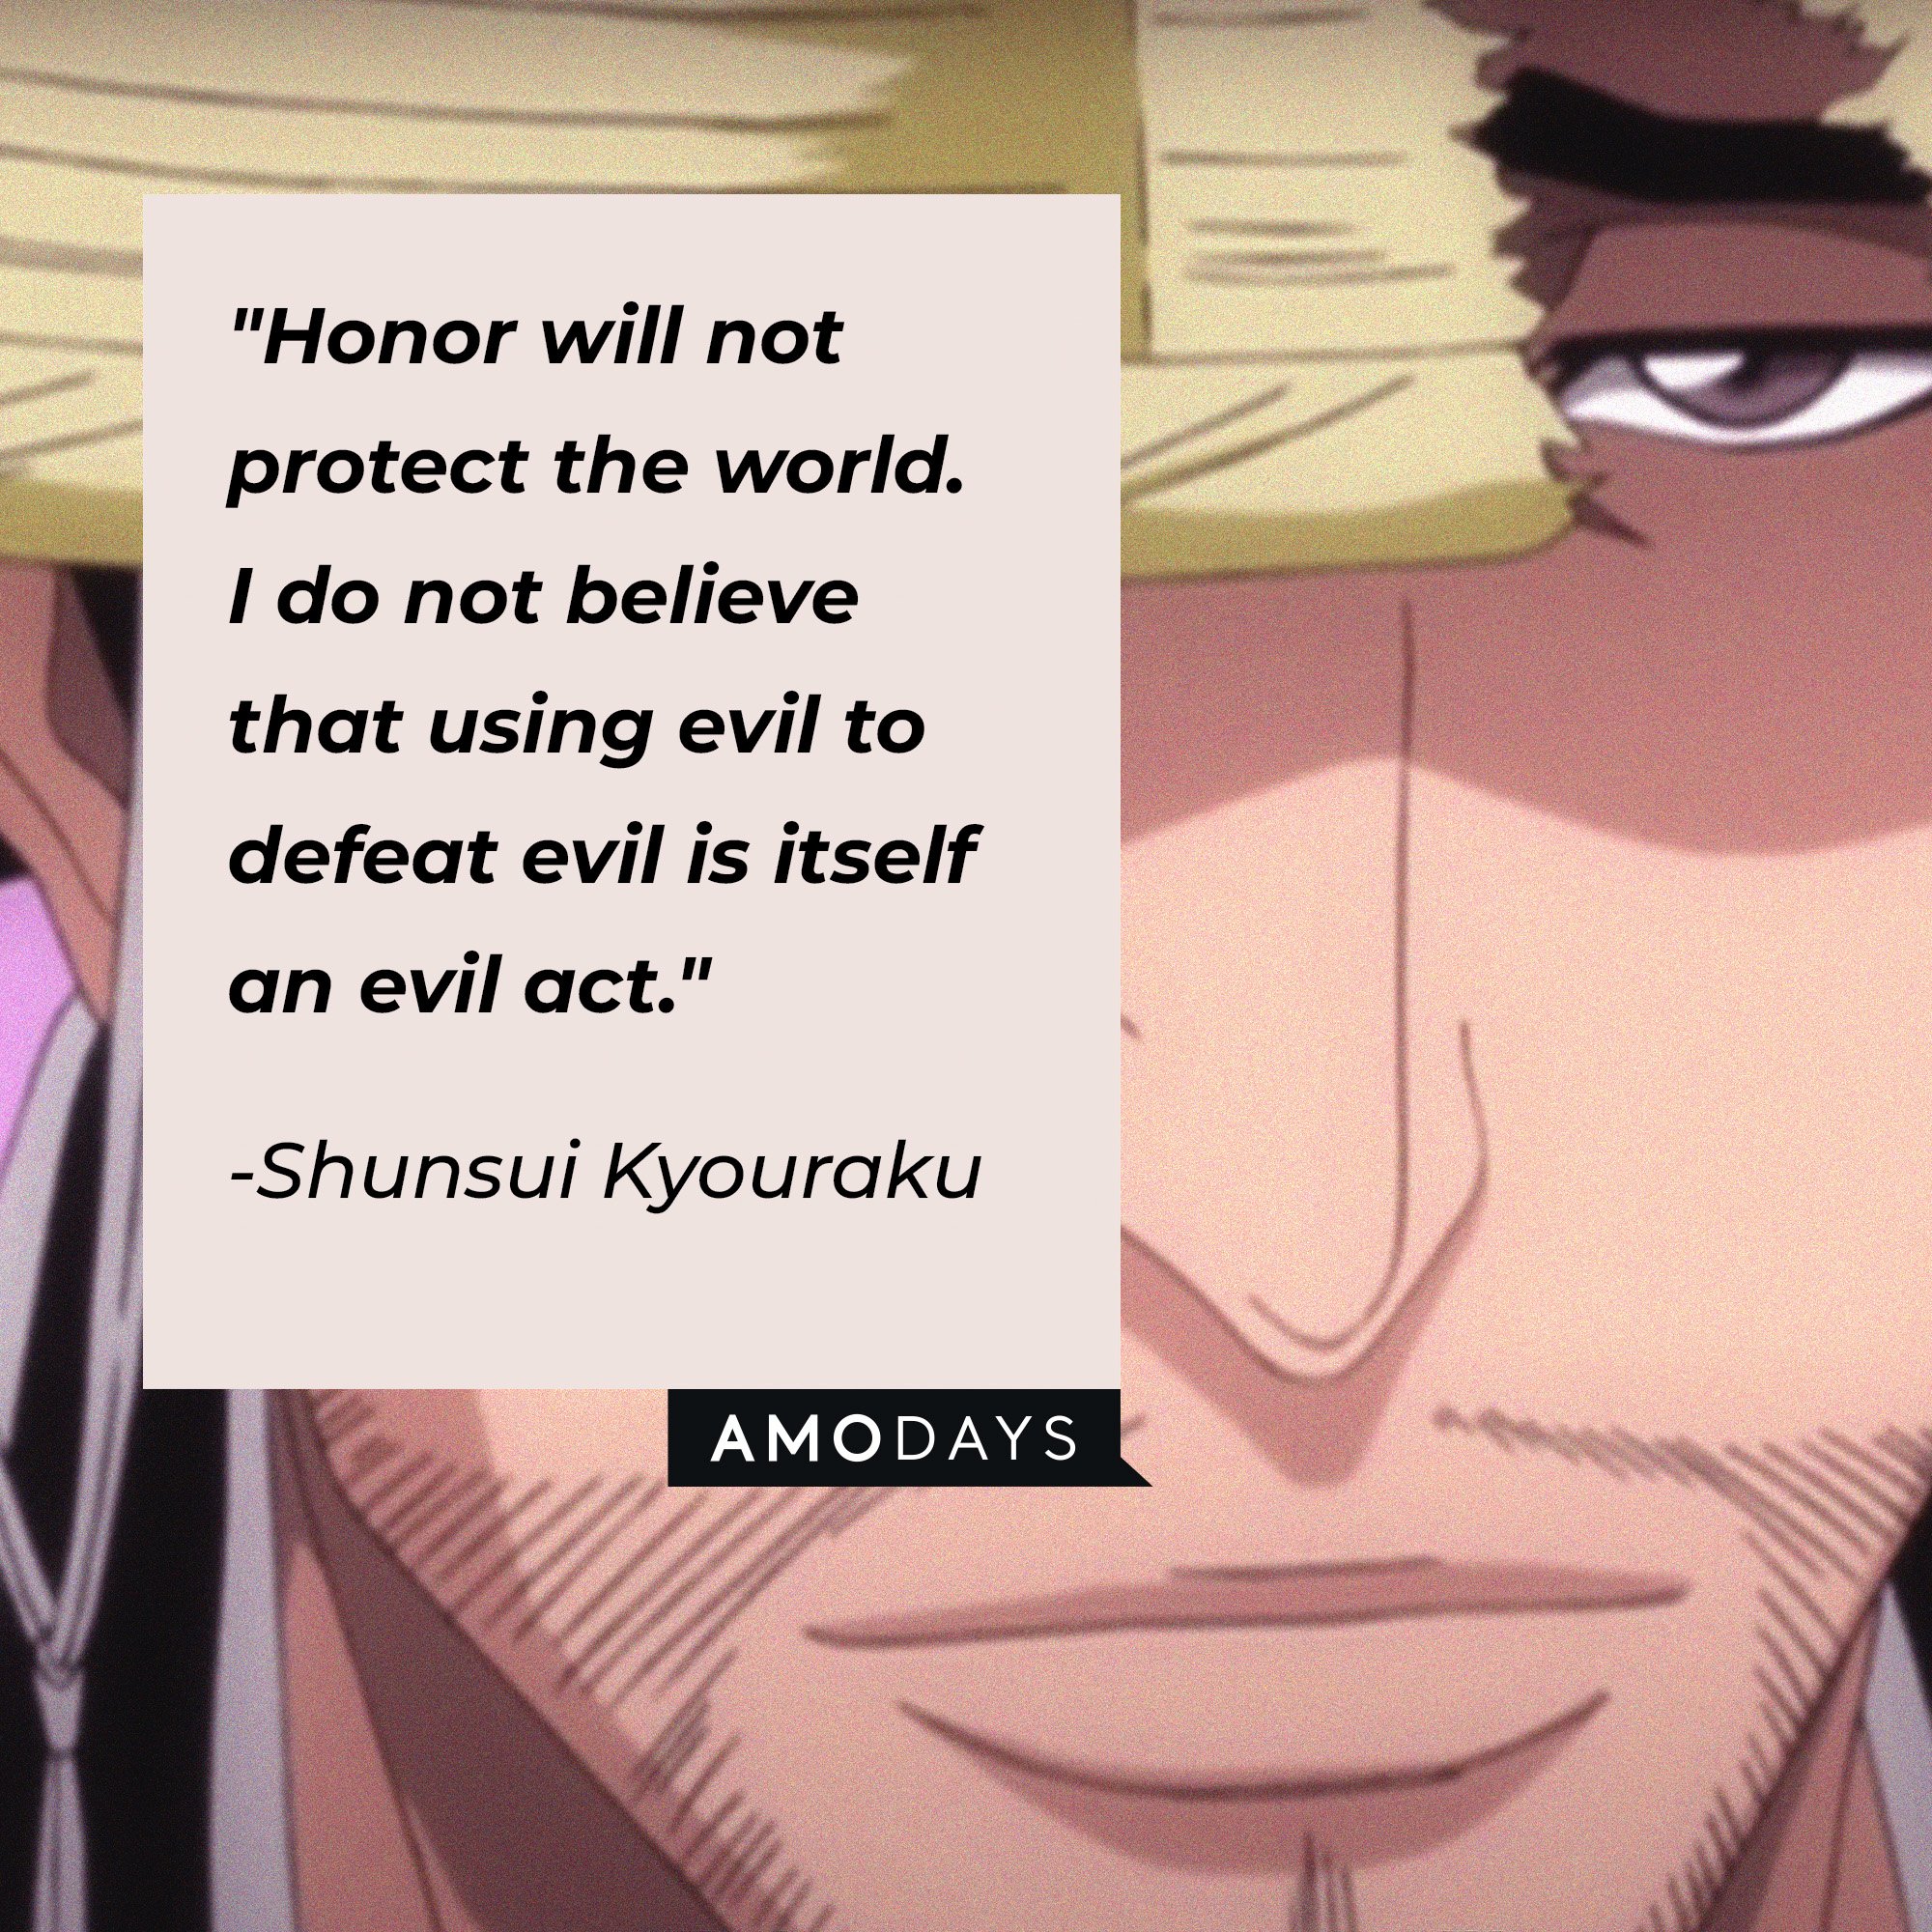  Shunsui Kyoraku’s quote: "Honor will not protect the world. I do not believe that using evil to defeat evil is itself an evil act." | Image: AmoDays